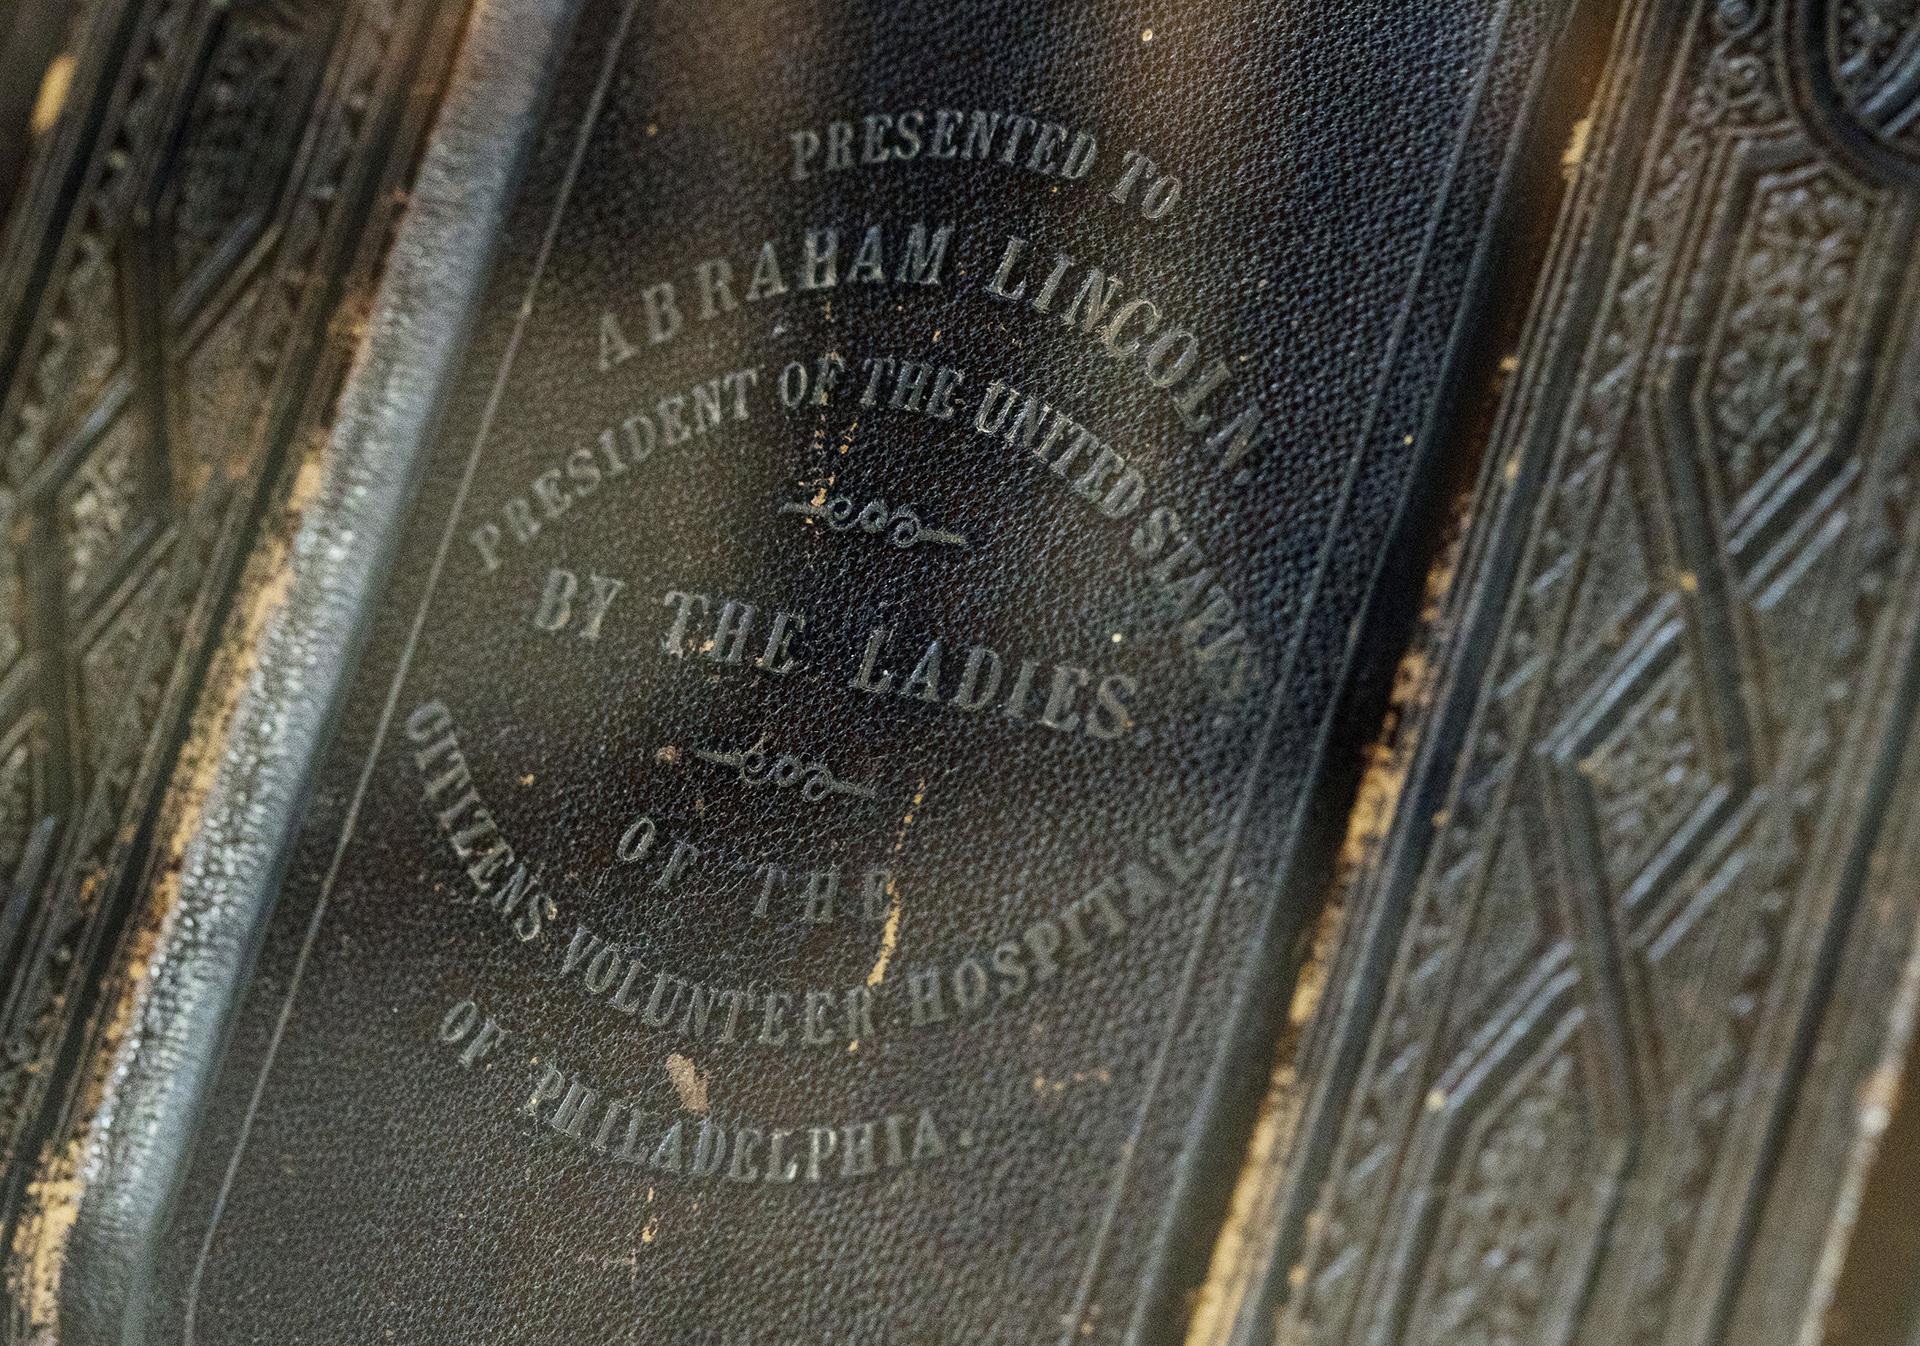 A King James version of the Bible, likely given to Abraham Lincoln in June 1864, that was later passed on by widow Mary Lincoln to her beloved Springfield neighbor Noyes W. Miner, a Baptist minister, is displayed at the Abraham Lincoln Presidential Library and Museum, where executive director Alan Lowe unveiled it, Thursday, June 20, 2019, in Springfield, Illinois. (Ted Schurter / The State Journal-Register via AP)